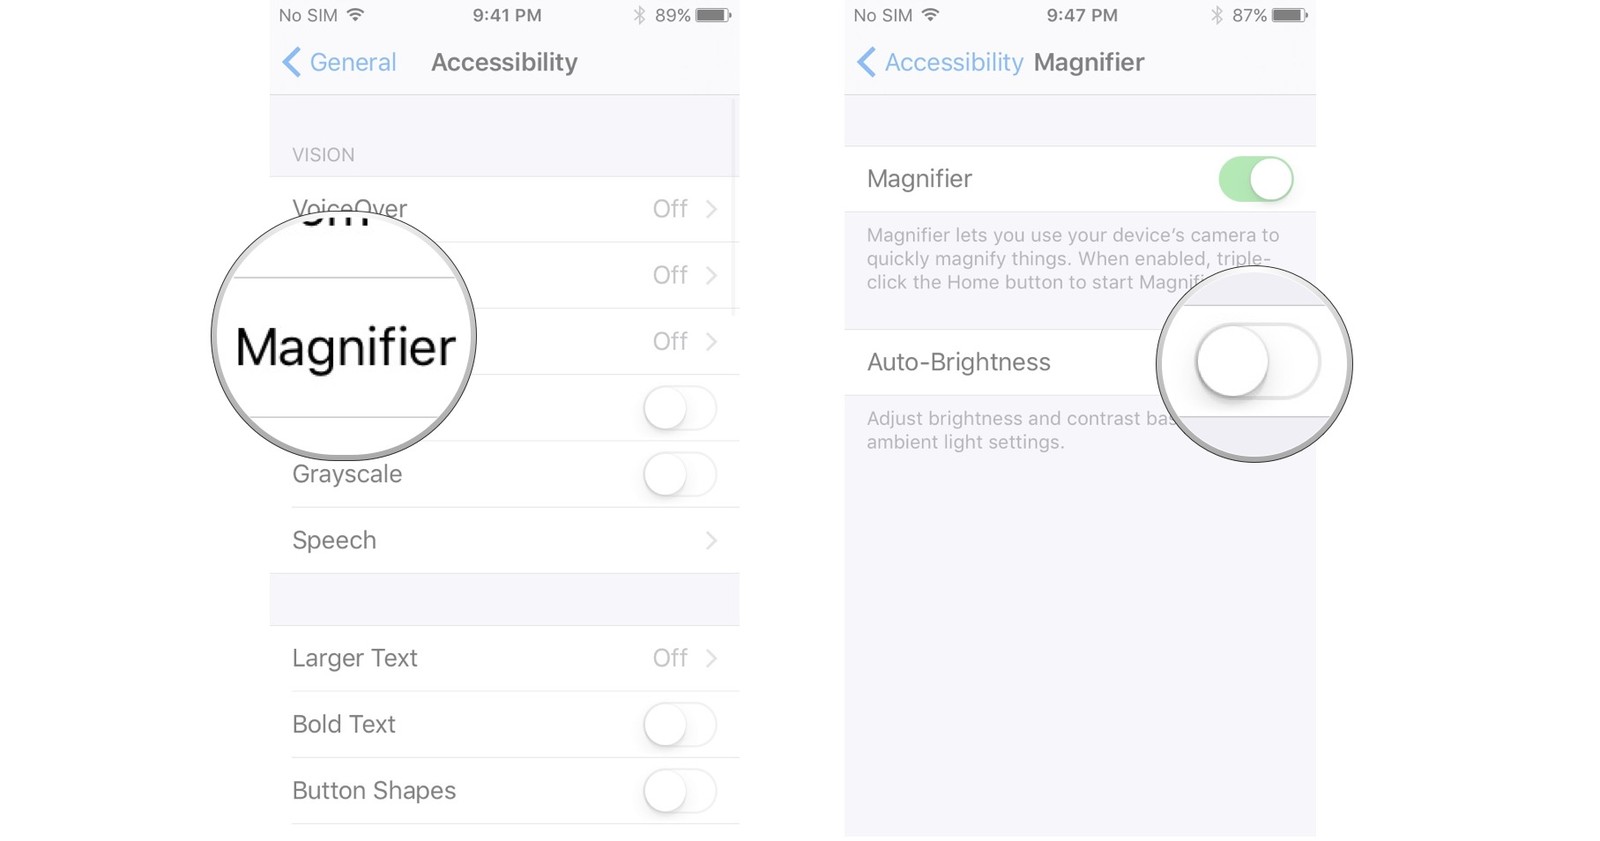 accessibility-ios10-magnifier-enablge-auto-brightness-screens-04